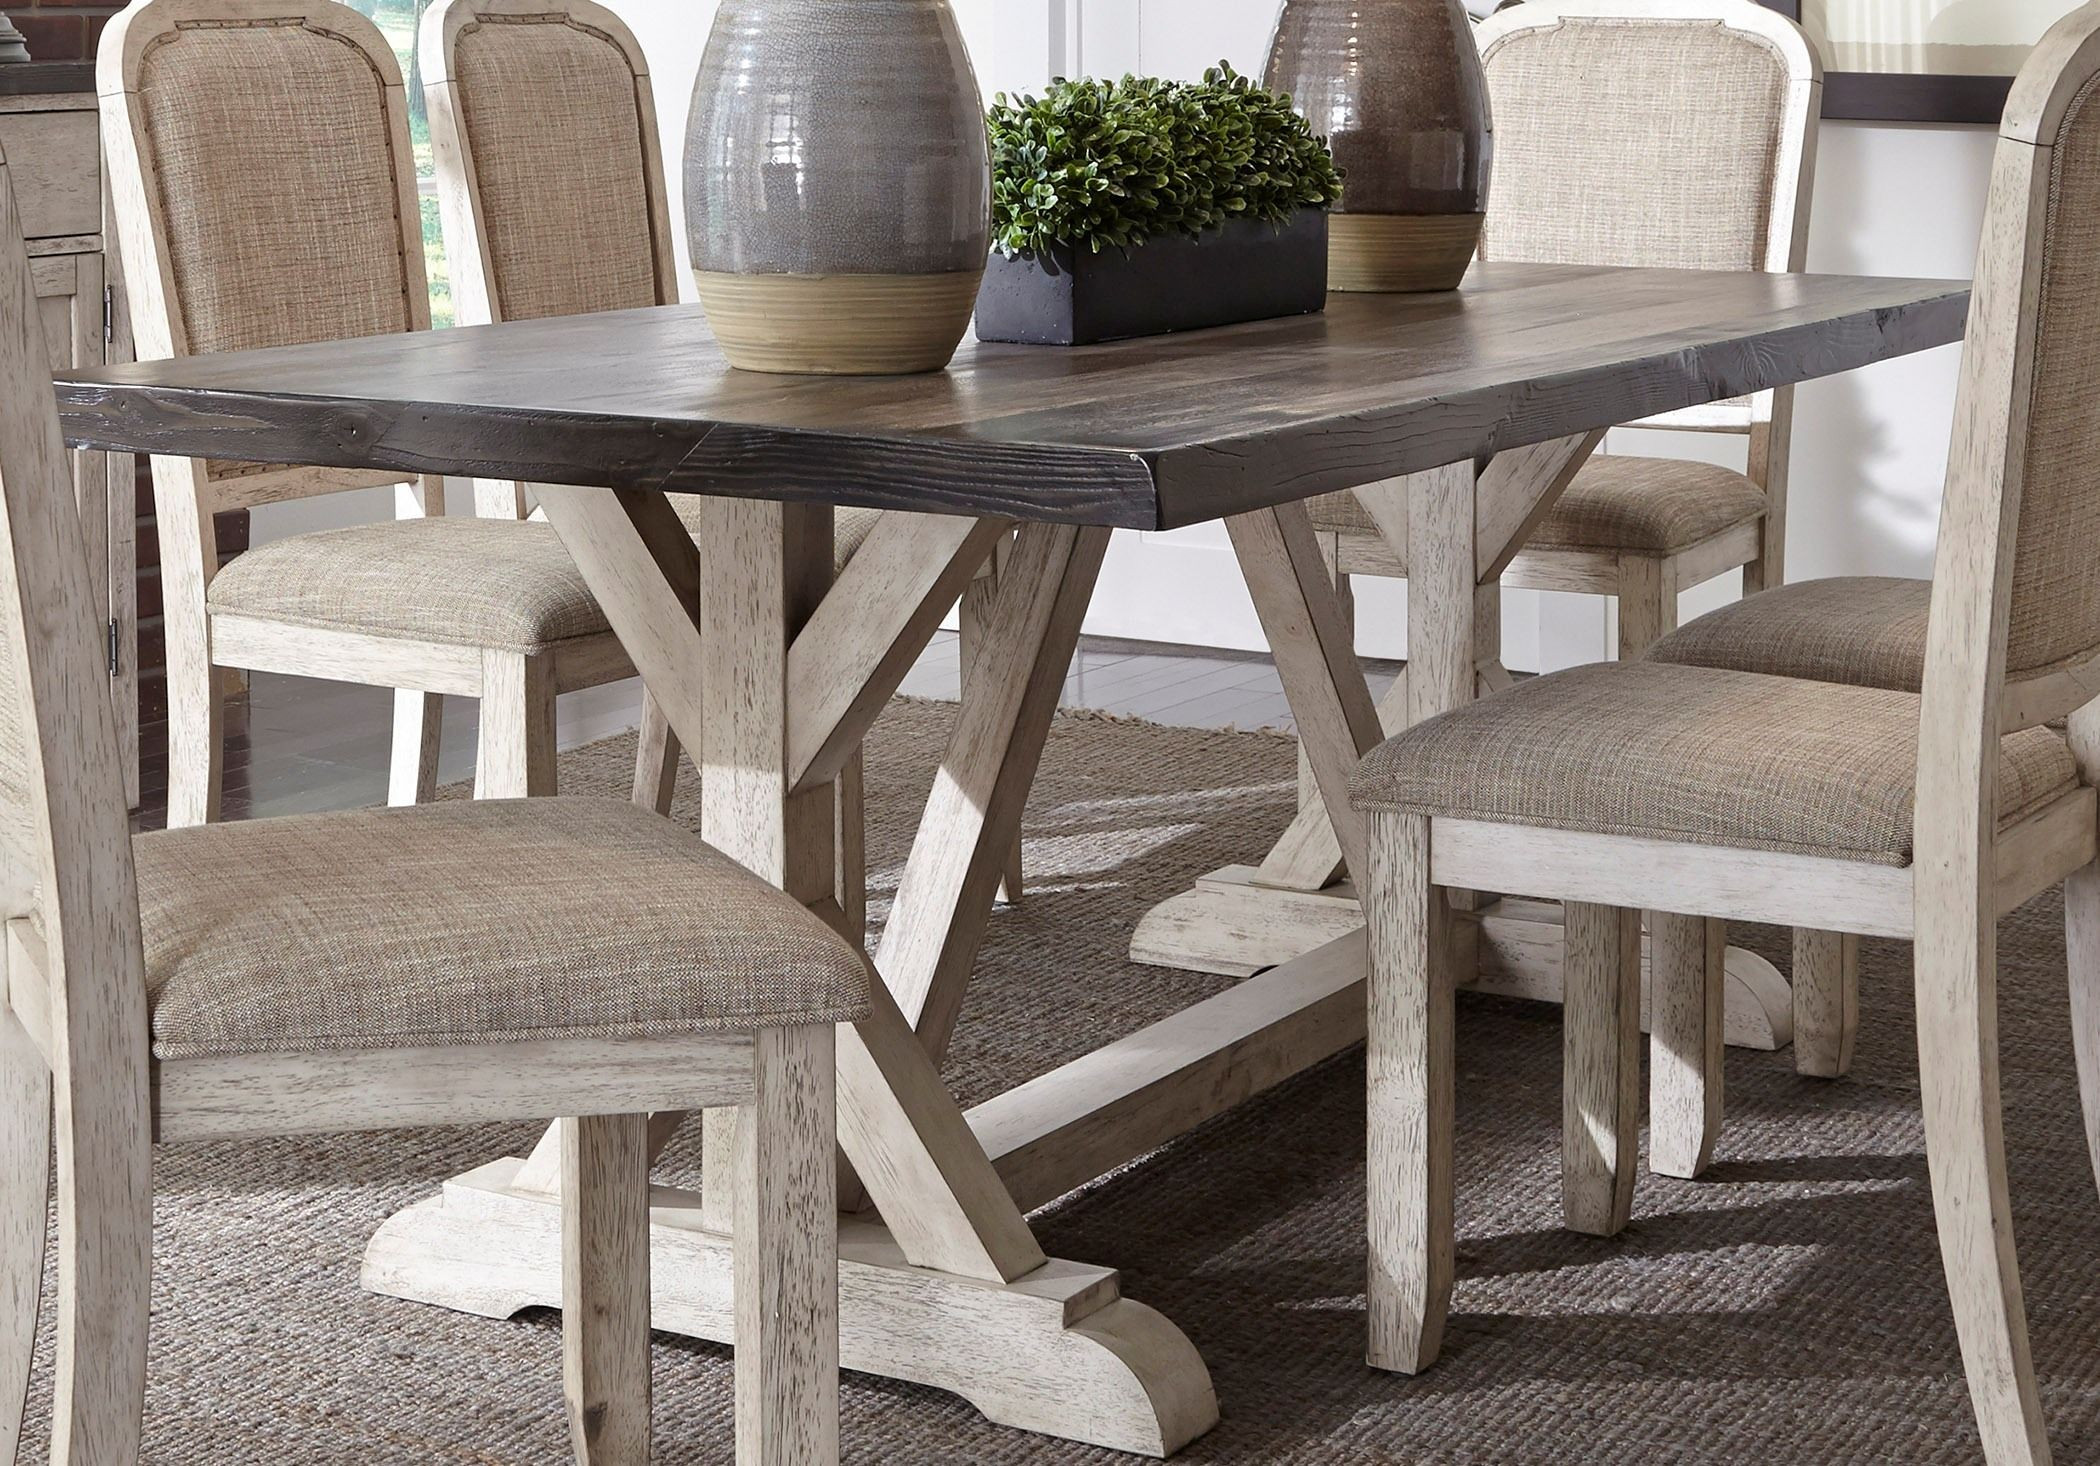 Rustic Kitchen Tables
 Willowrun Rustic White Trestle Dining Table from Liberty